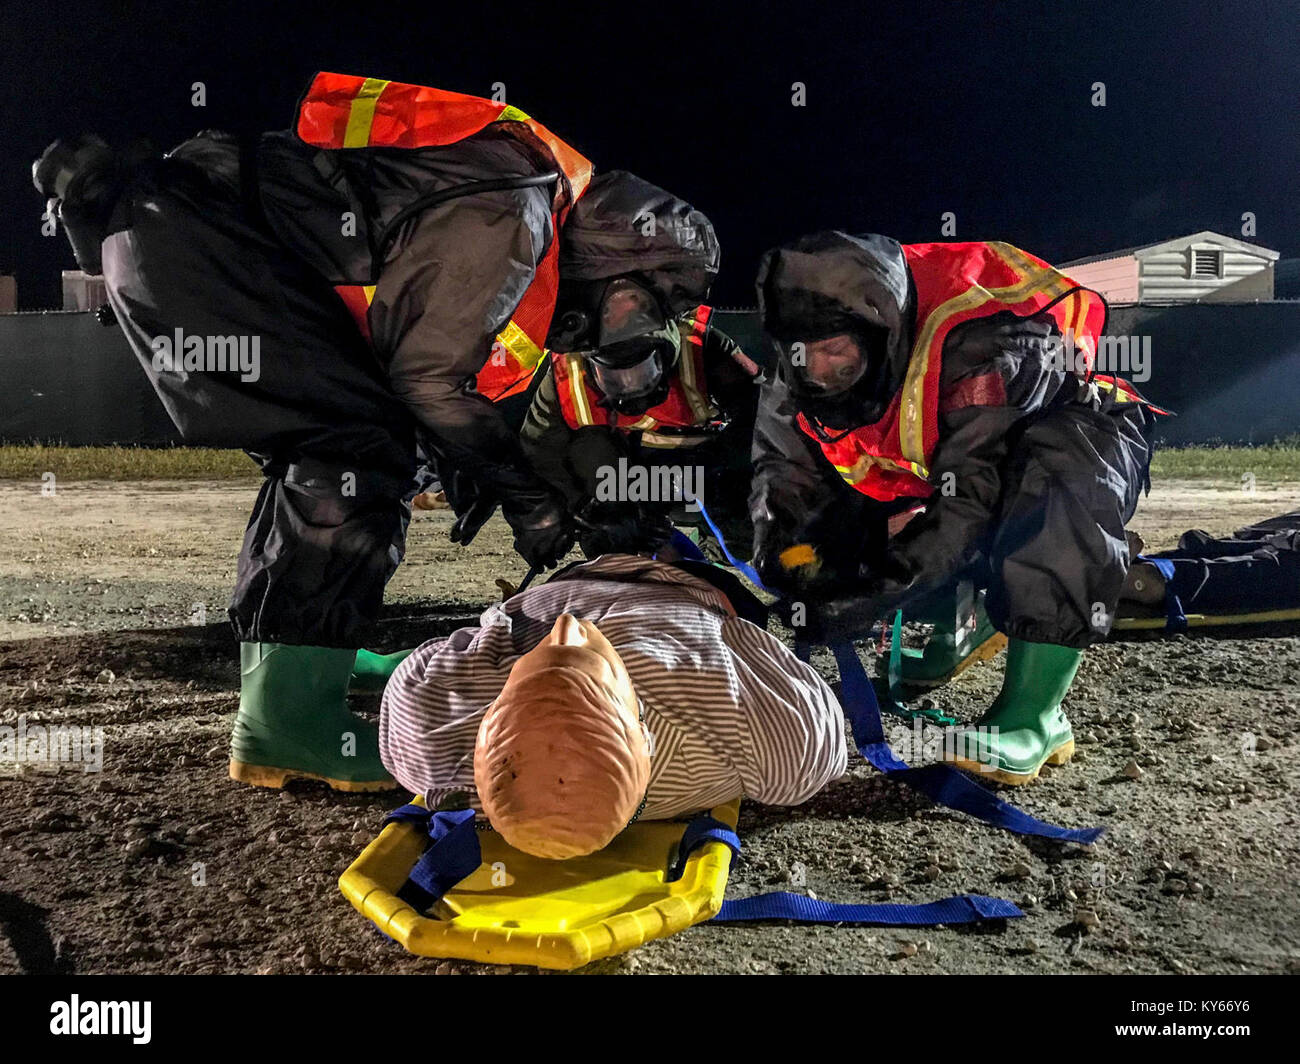 U.S. Army Active Duty, National Guard, and Reserve Soldiers along with local first responders participate in a Mass Casualty Decontamination exercise at the Homestead-Miami Speedway, in Miami-Dade, Florida, Jan. 9, 2018.  This is the 3rd in a series of joint training exercises between Active Duty, Guard, and Reserve Army units and local municipalities across the United States. This JTE focused on the decontamination and transportation of casualties in a simulated mass chemical attack. (DoD Stock Photo